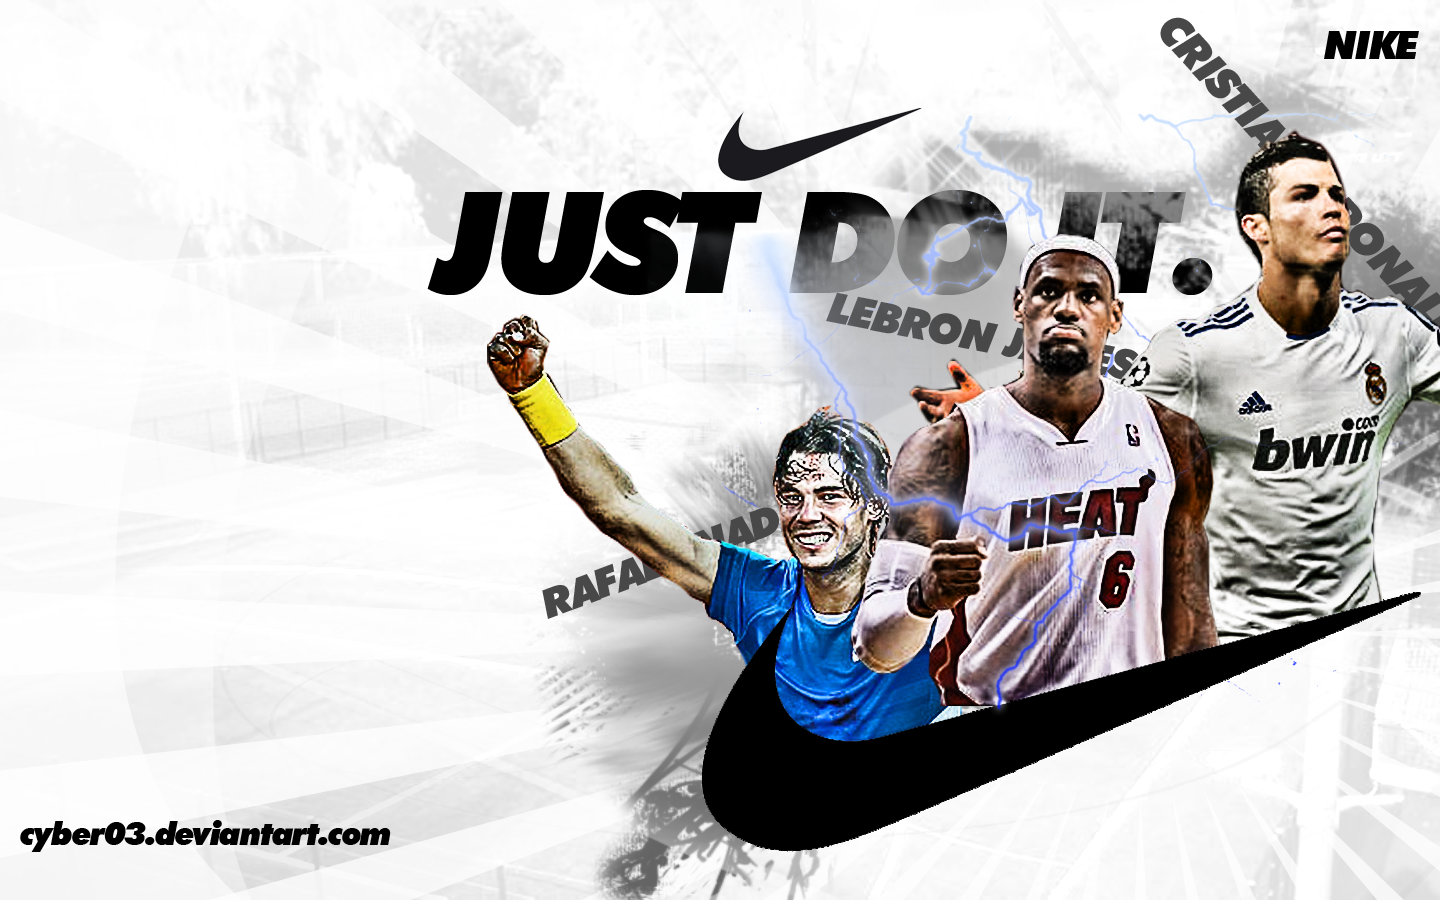 torre Cuarto persecucion Nike 3: Just Do It. by CyBer03 on DeviantArt